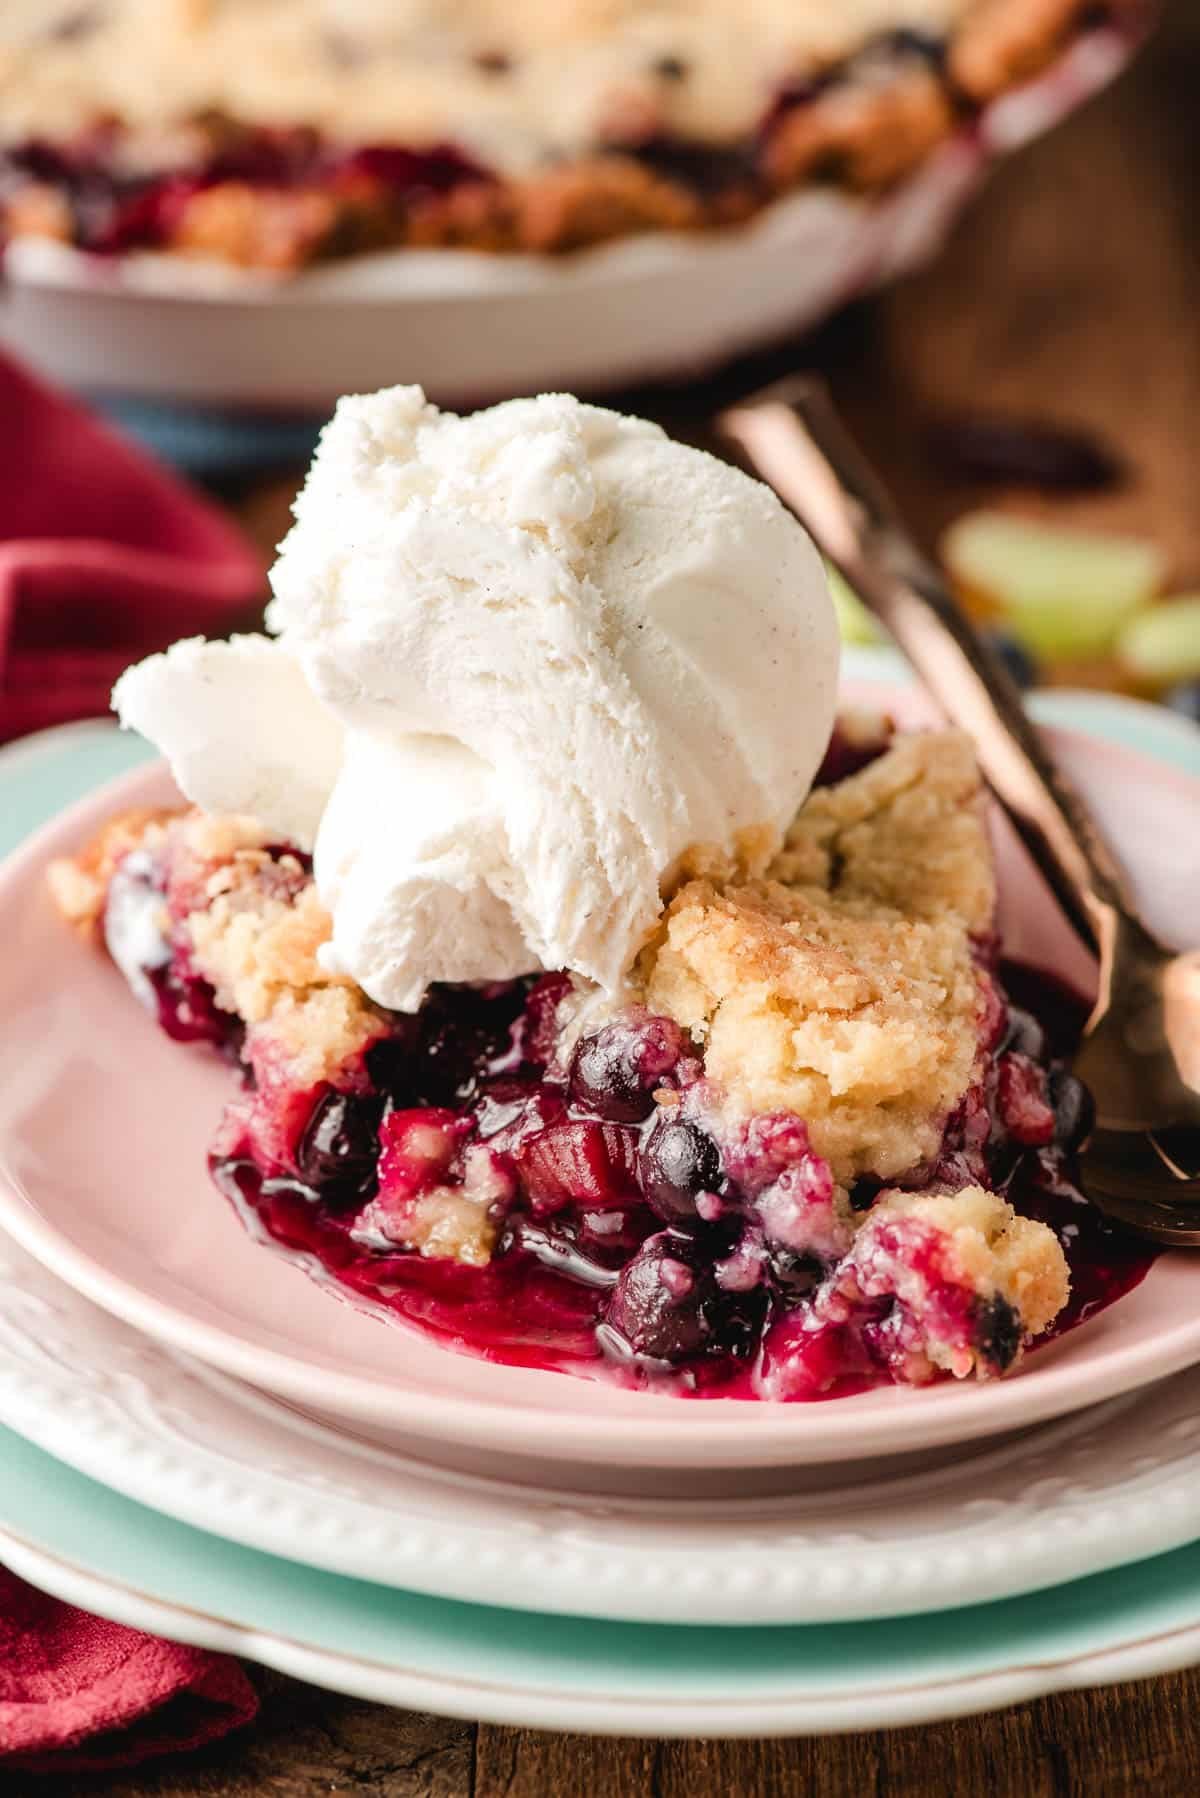 Slice of Blueberry Rhubarb Pie with a scoop of ice cream on top.